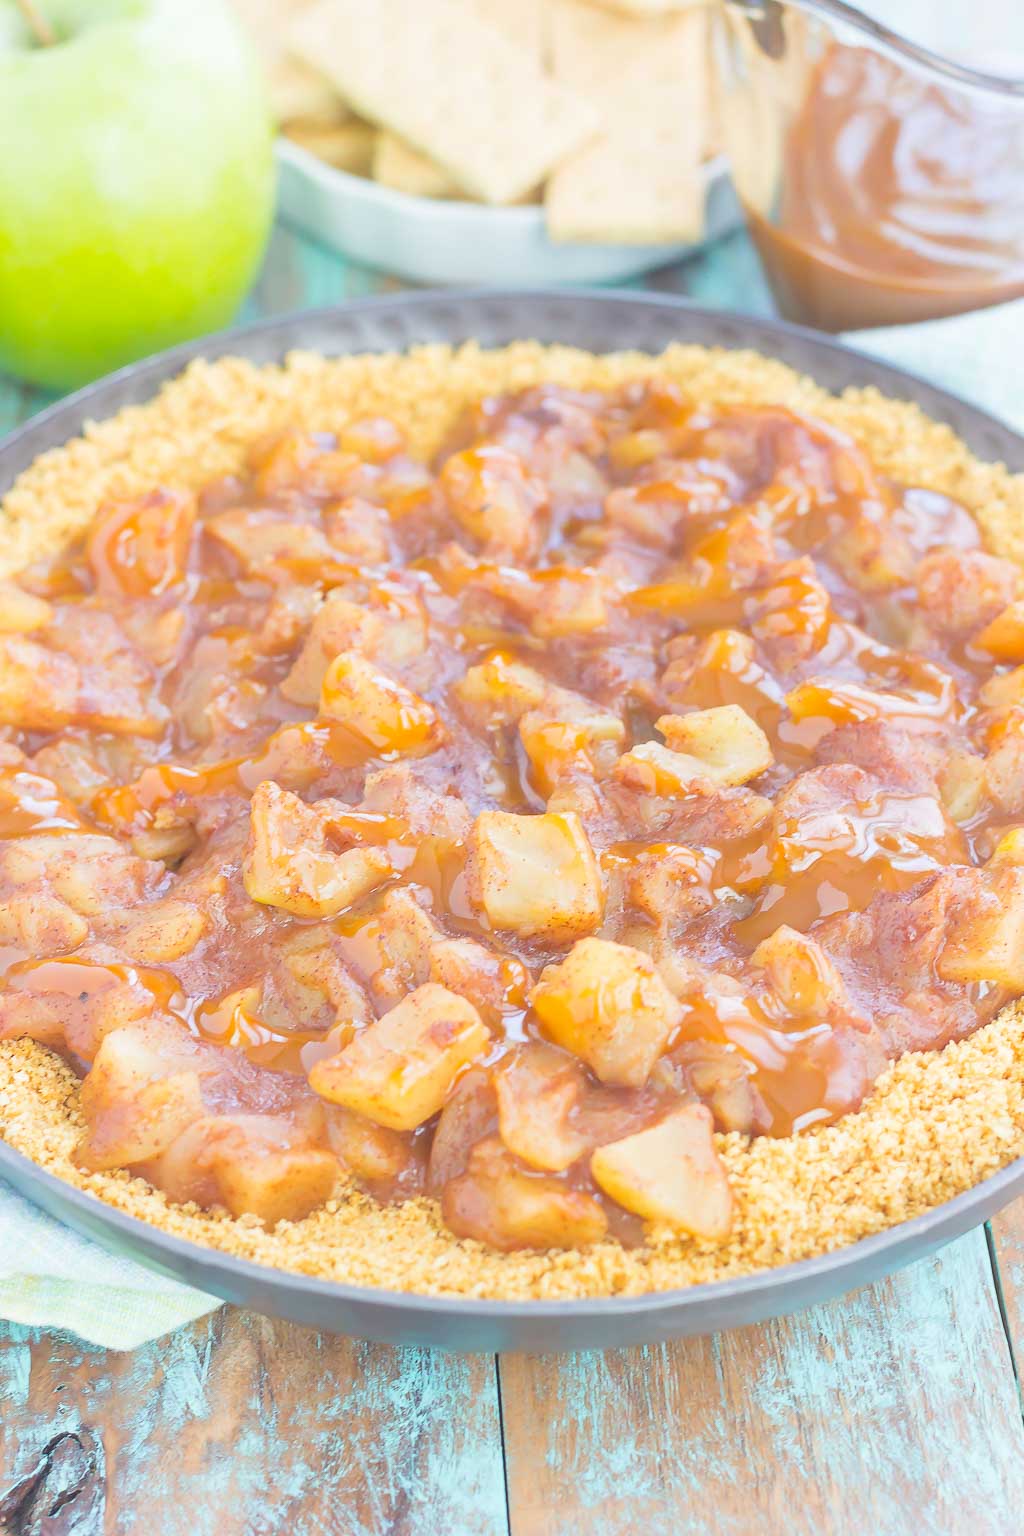 This Easy Caramel Apple Pie Dip tastes just like the classic pie, but without all of the prep work. Fresh apples are tossed with spices and then sautéed until tender. Drizzled with caramel and loaded onto a buttery graham cracker crust, this simple dessert is loaded with fall flavors!